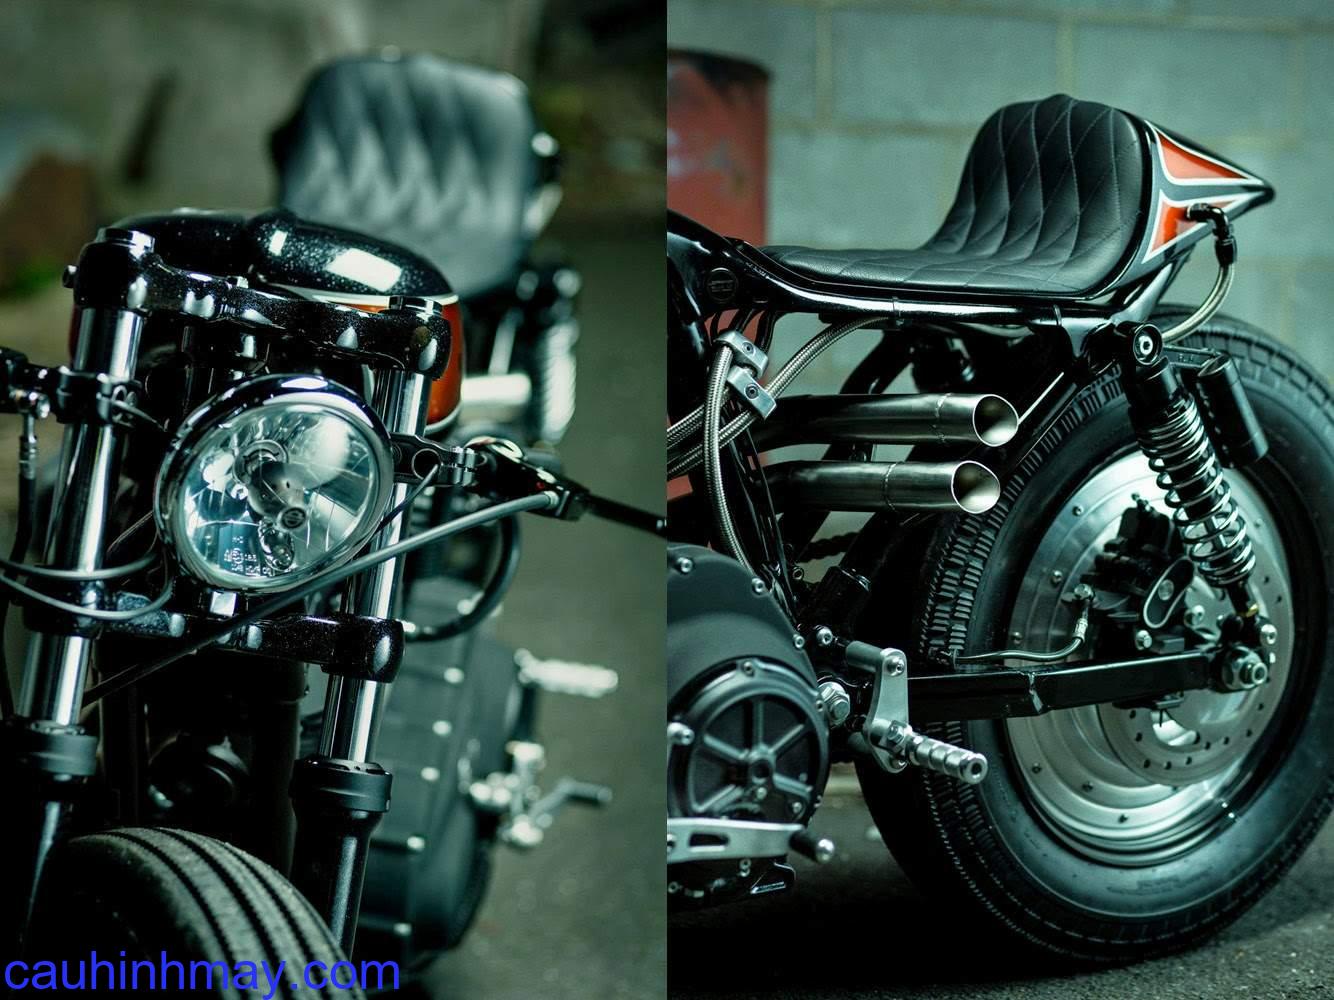 HARLEY FORTY-EIGHT SPORTSTER K1 BY KOMMUNE - cauhinhmay.com